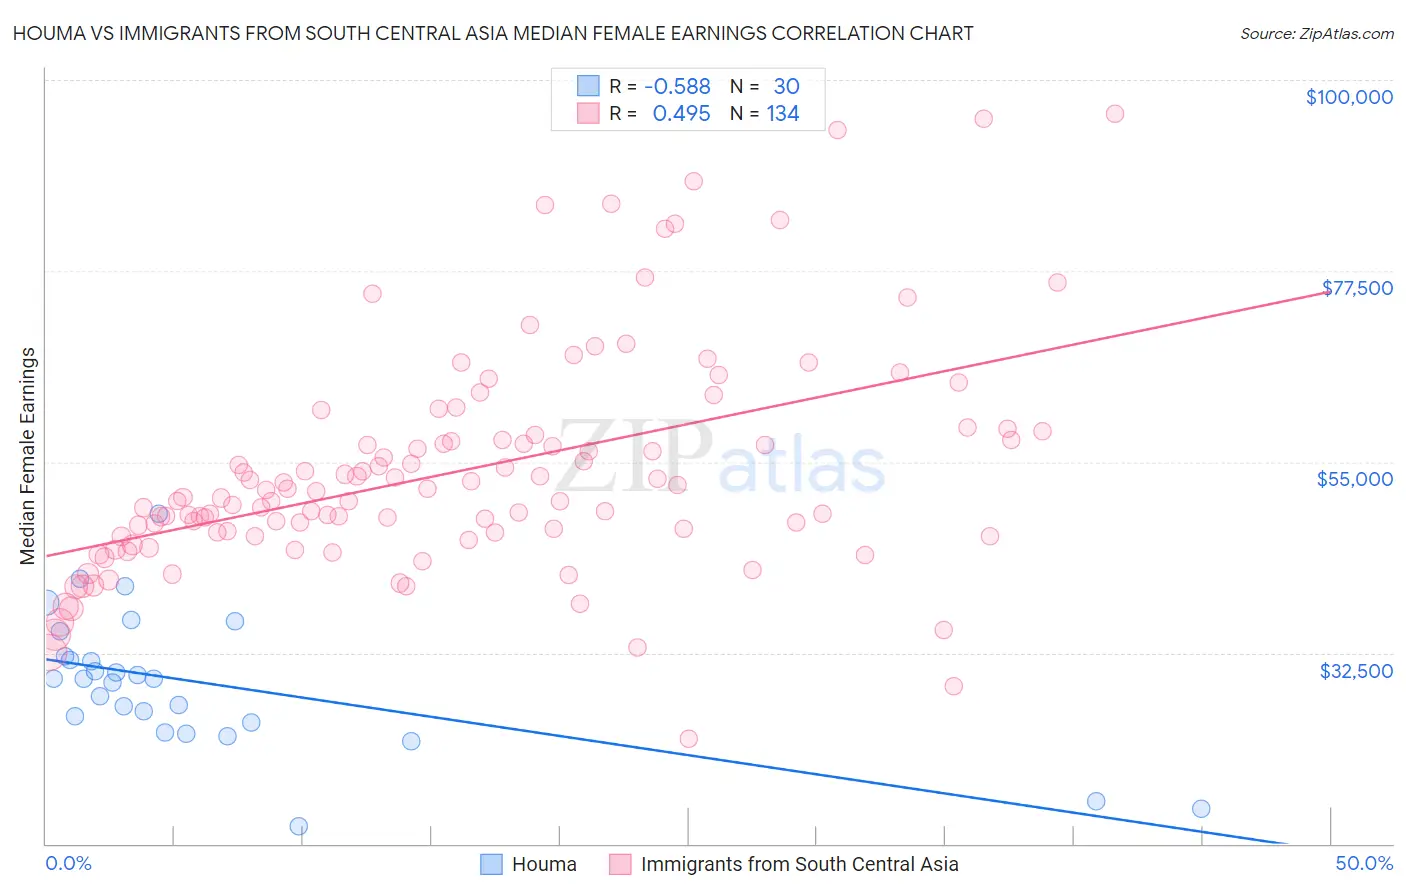 Houma vs Immigrants from South Central Asia Median Female Earnings